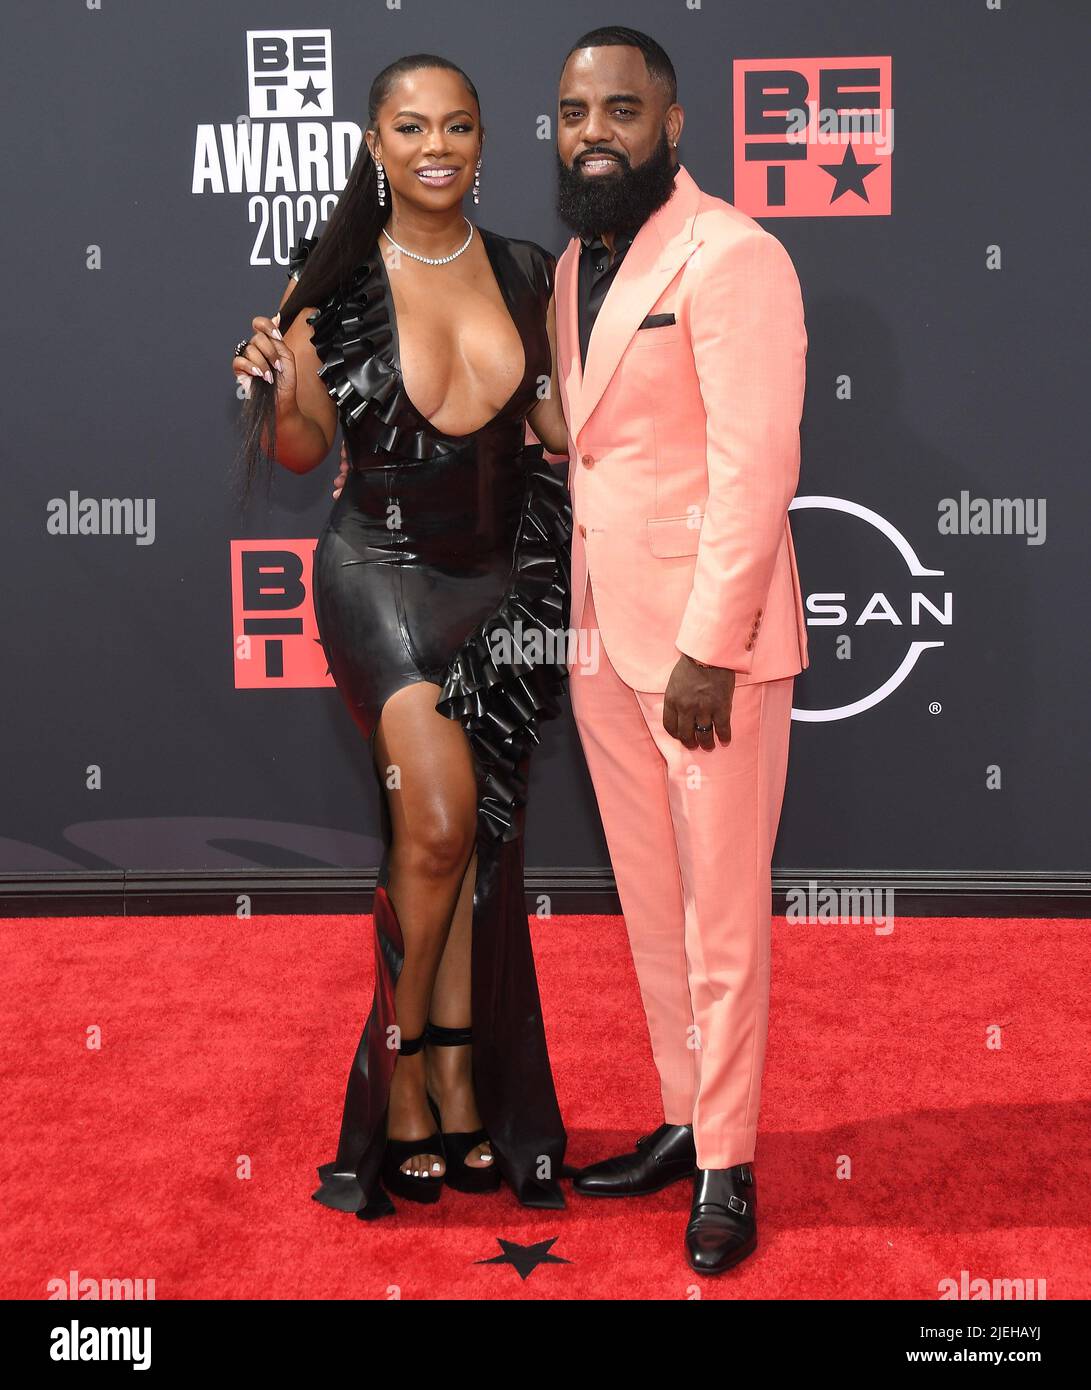 Los Angeles, USA. 26th June, 2022. (L-R) Kandi Burruss and Todd Tucker arrives at the BET Awards 2022 held at the Microsoft Theater in Los Angeles, CA on Sunday, ?June 26, 2022. (Photo By Sthanlee B. Mirador/Sipa USA) Credit: Sipa USA/Alamy Live News Stock Photo